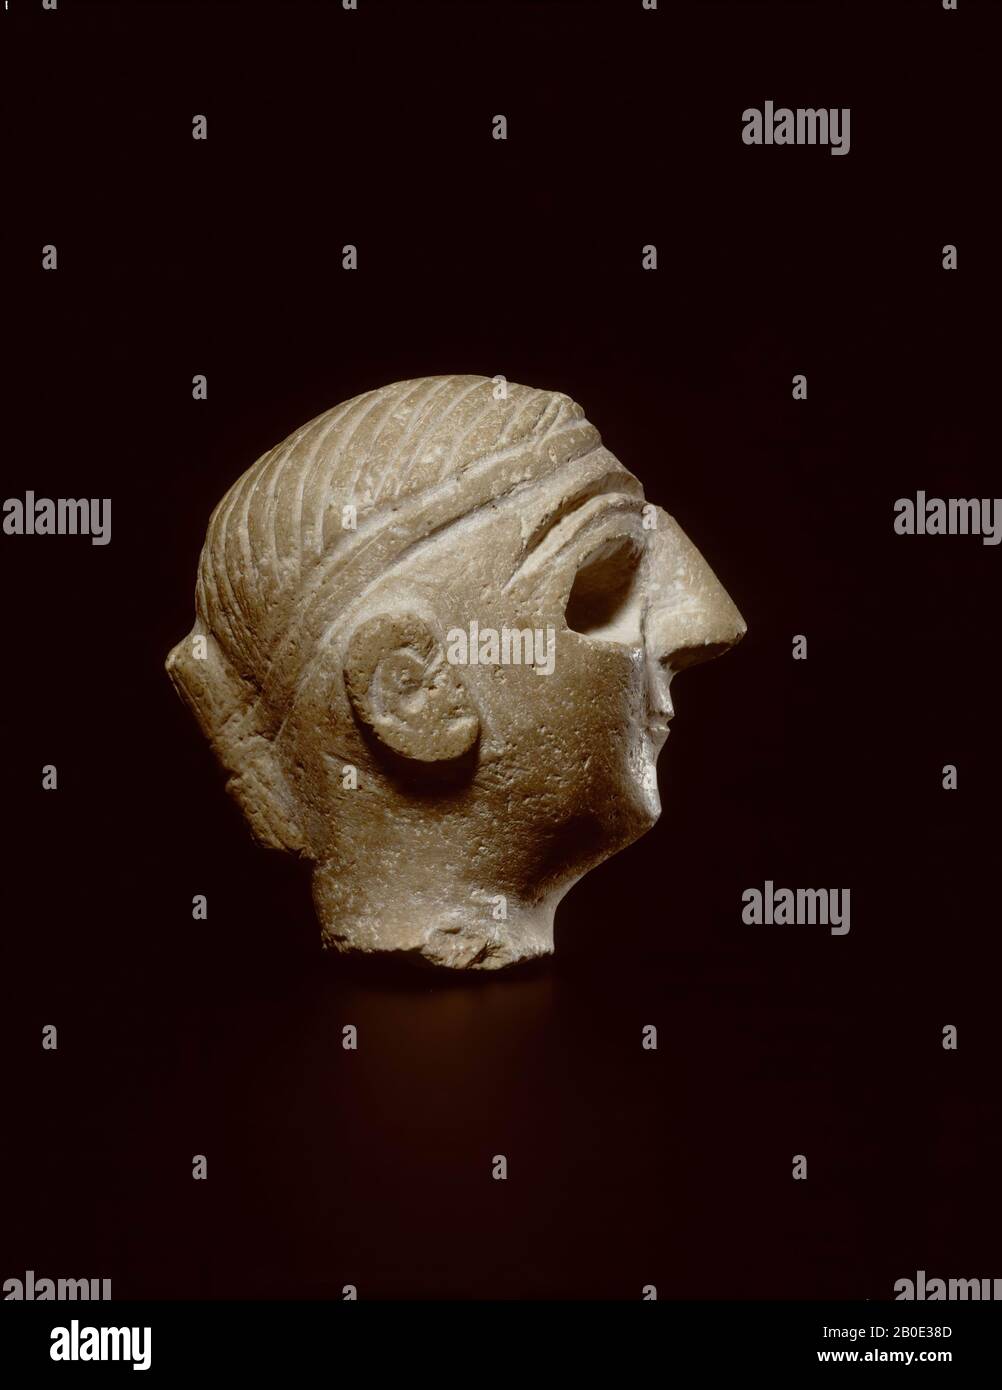 A woman's head of a cream-colored limestone, with a pointy nose. The eyes were originally inscribed., Sculpture, sculpture, stone, limestone, H 6.1 cm, L 5.5 cm, Early Bronze Age 2800 BC, Iraq Stock Photo